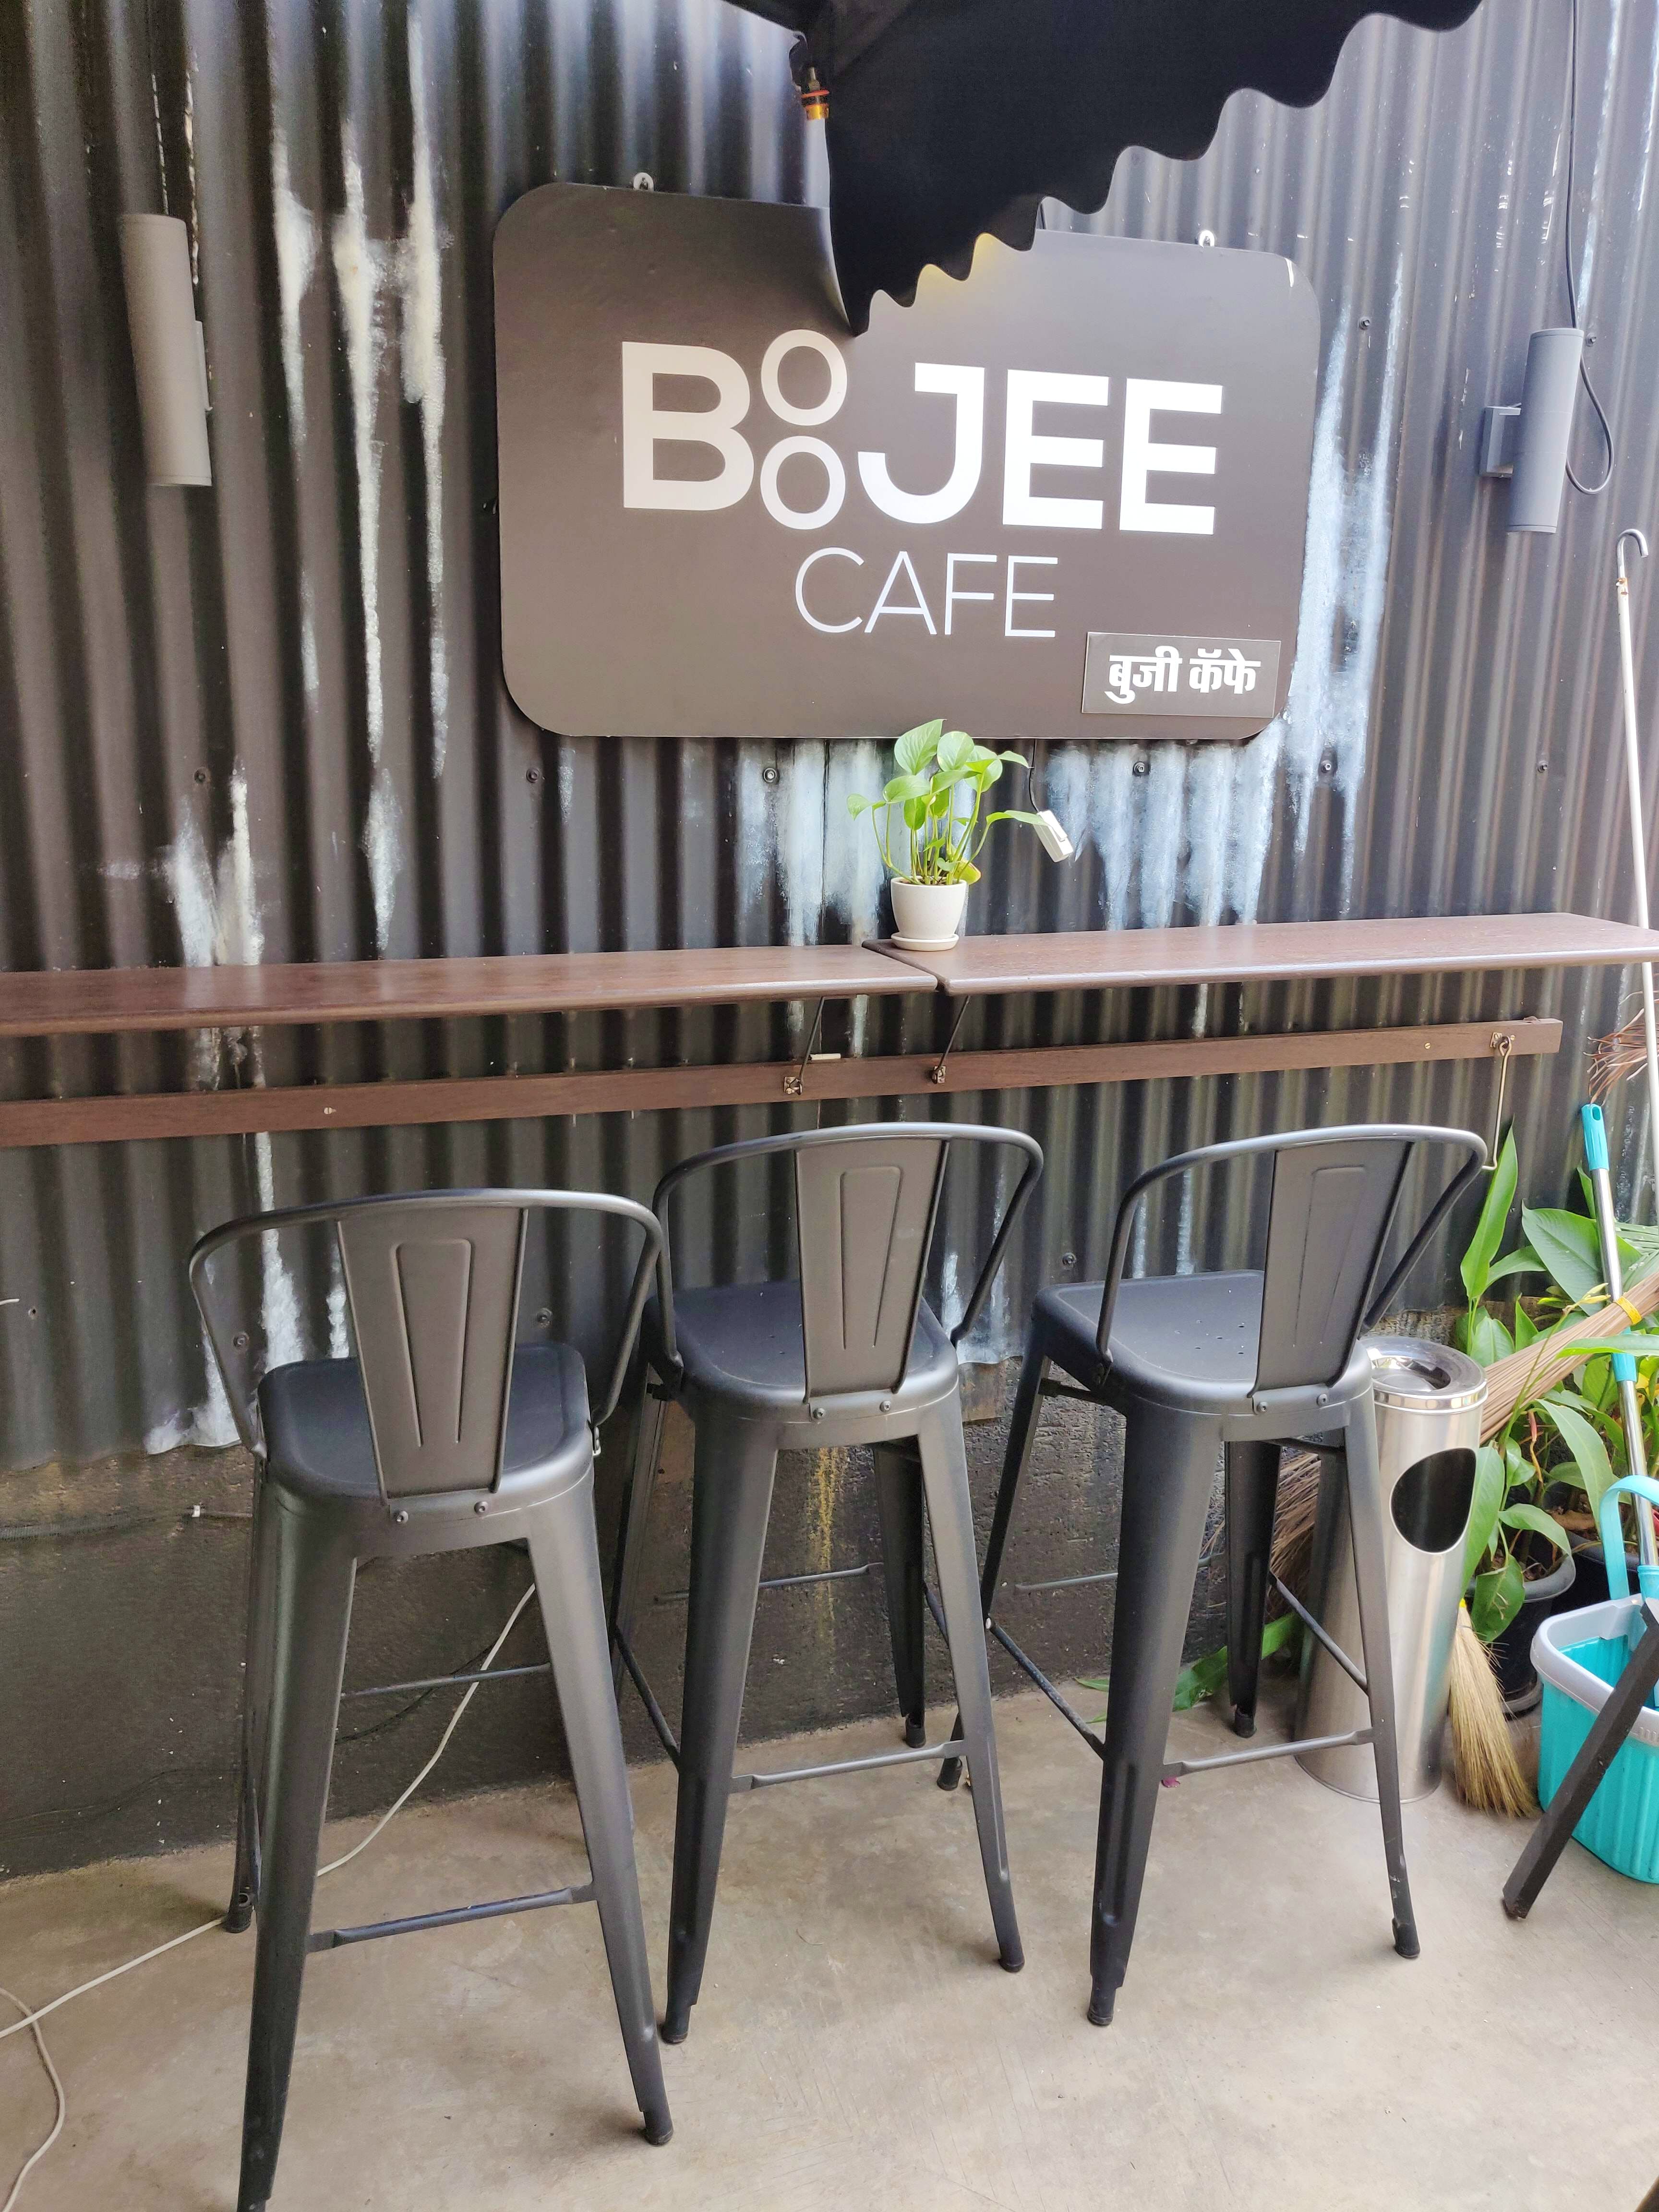 Head To Boojee Cafe For Healthy Food & Gluten Free Options